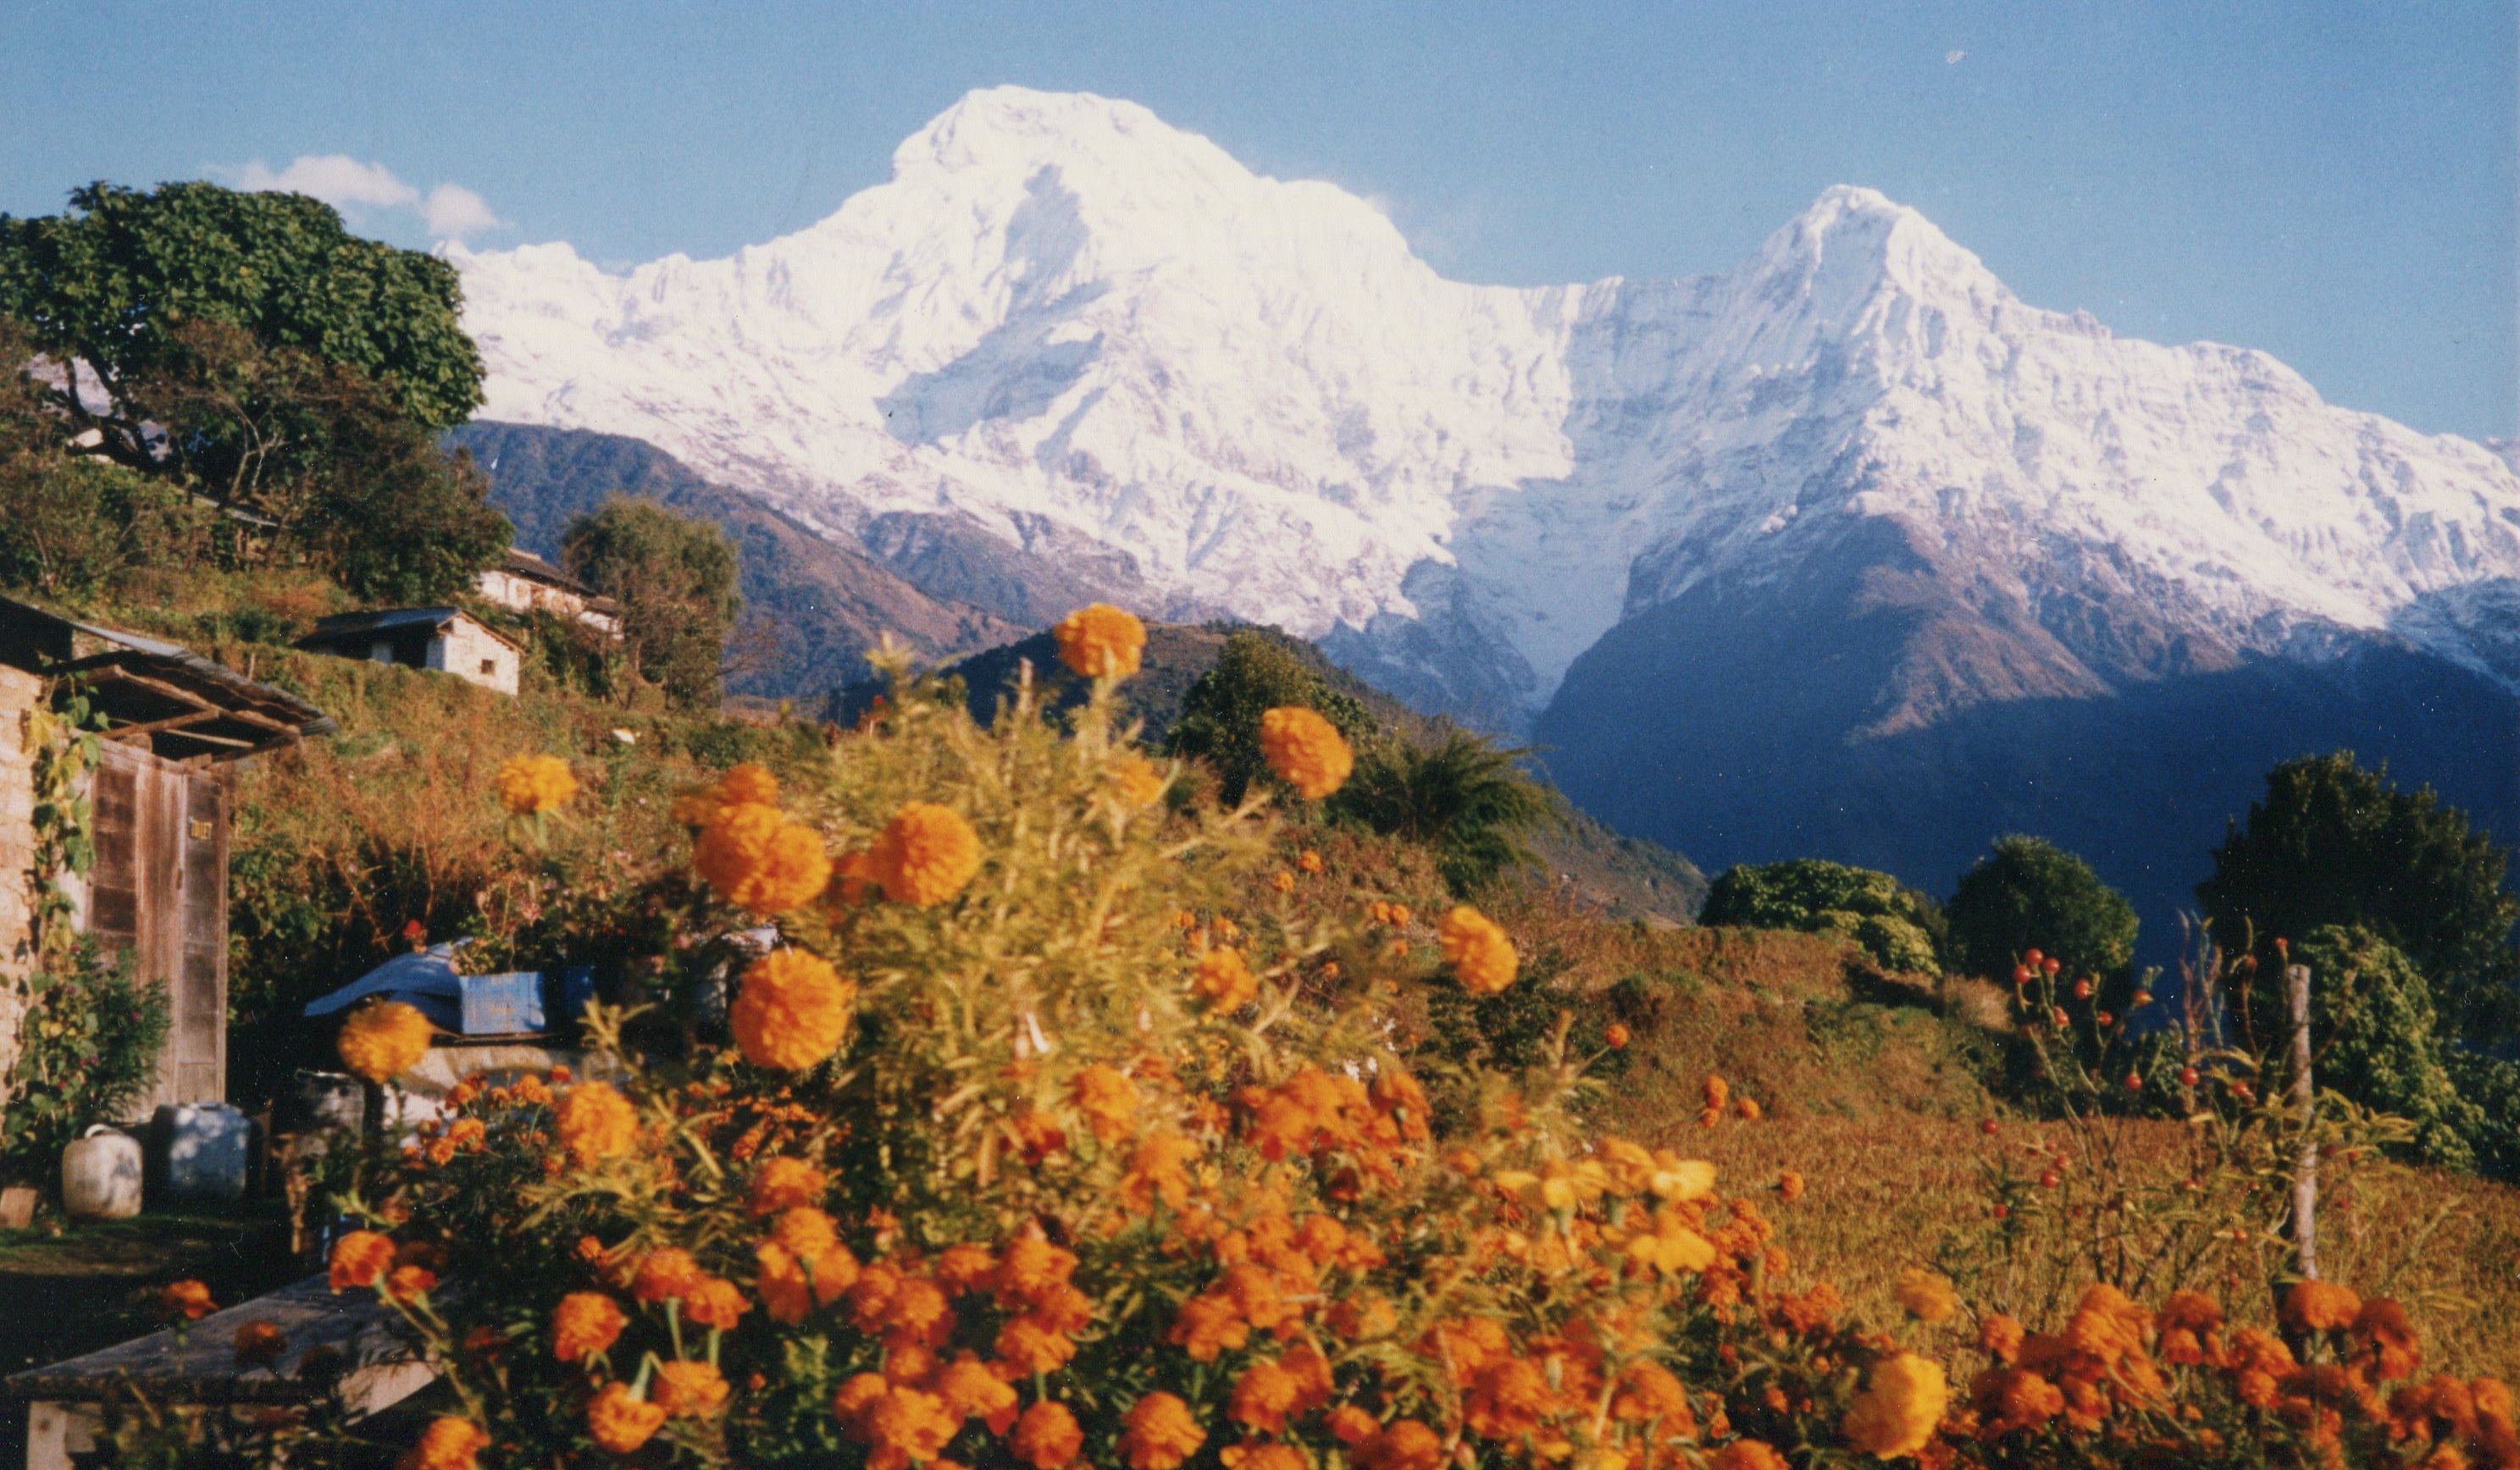 Annapurna South Peak and Hiunchuli from Gandrung